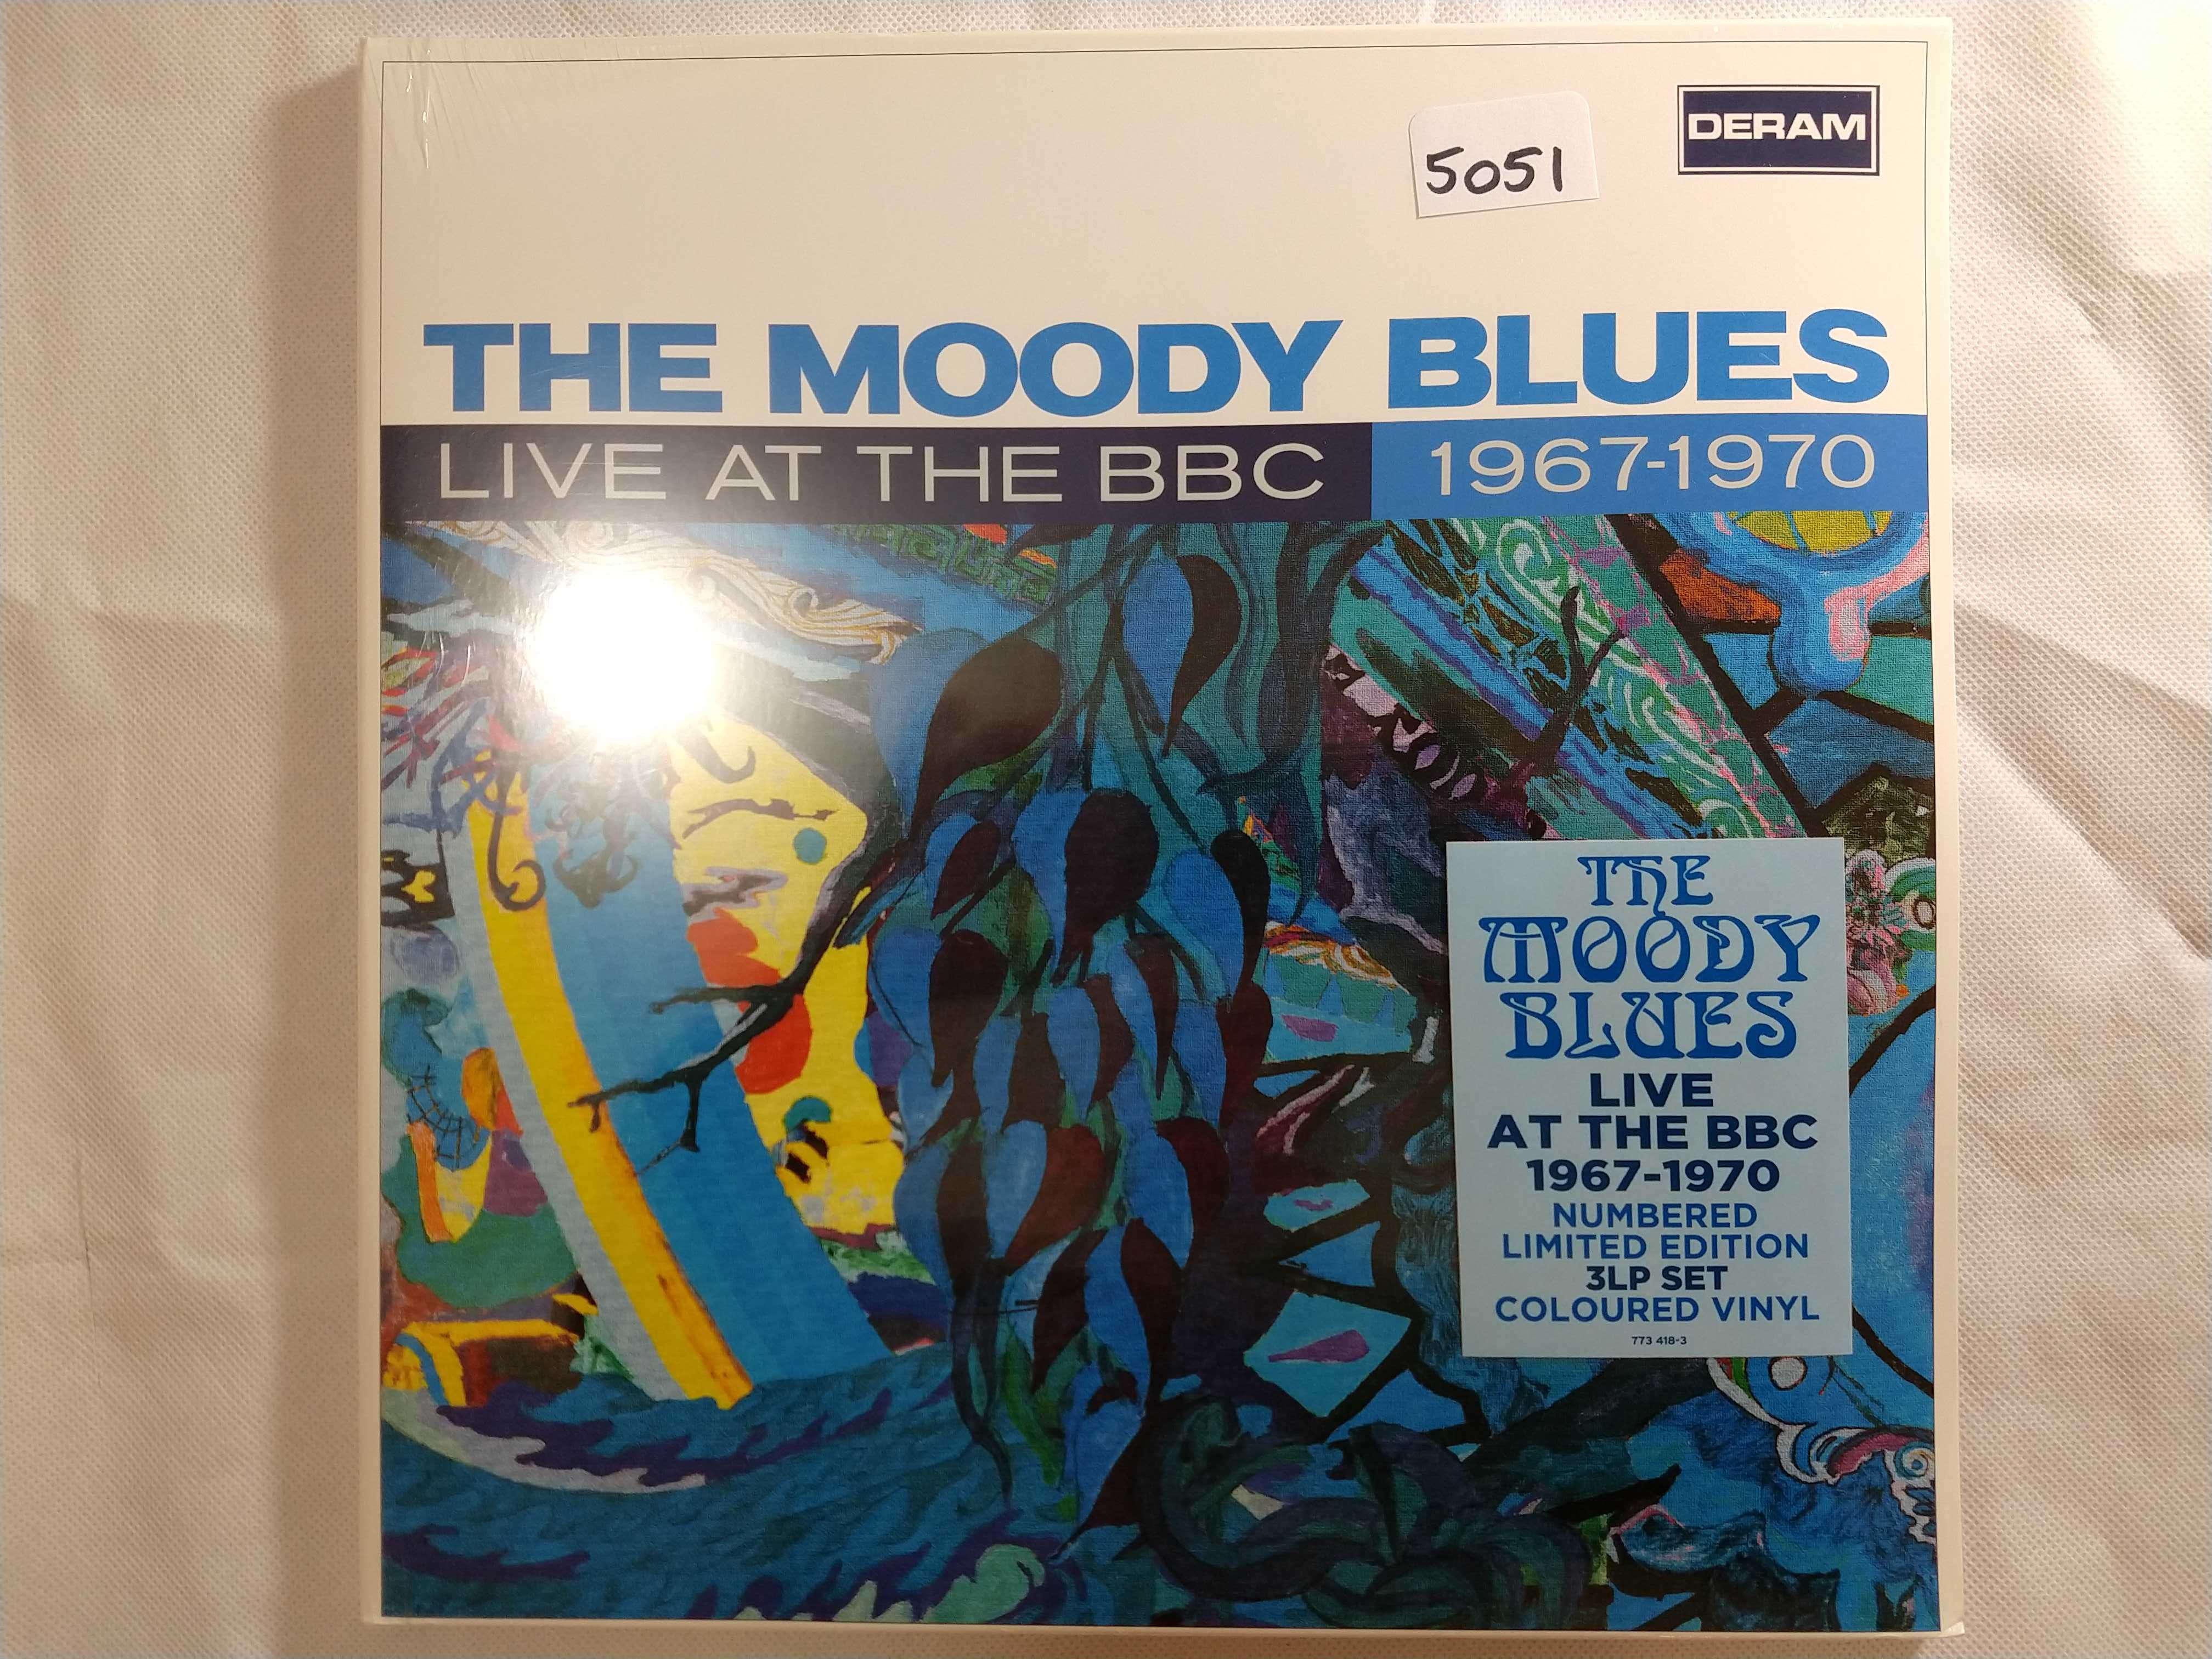 The Moody Blues Live at BBC 1967/1970 3LP